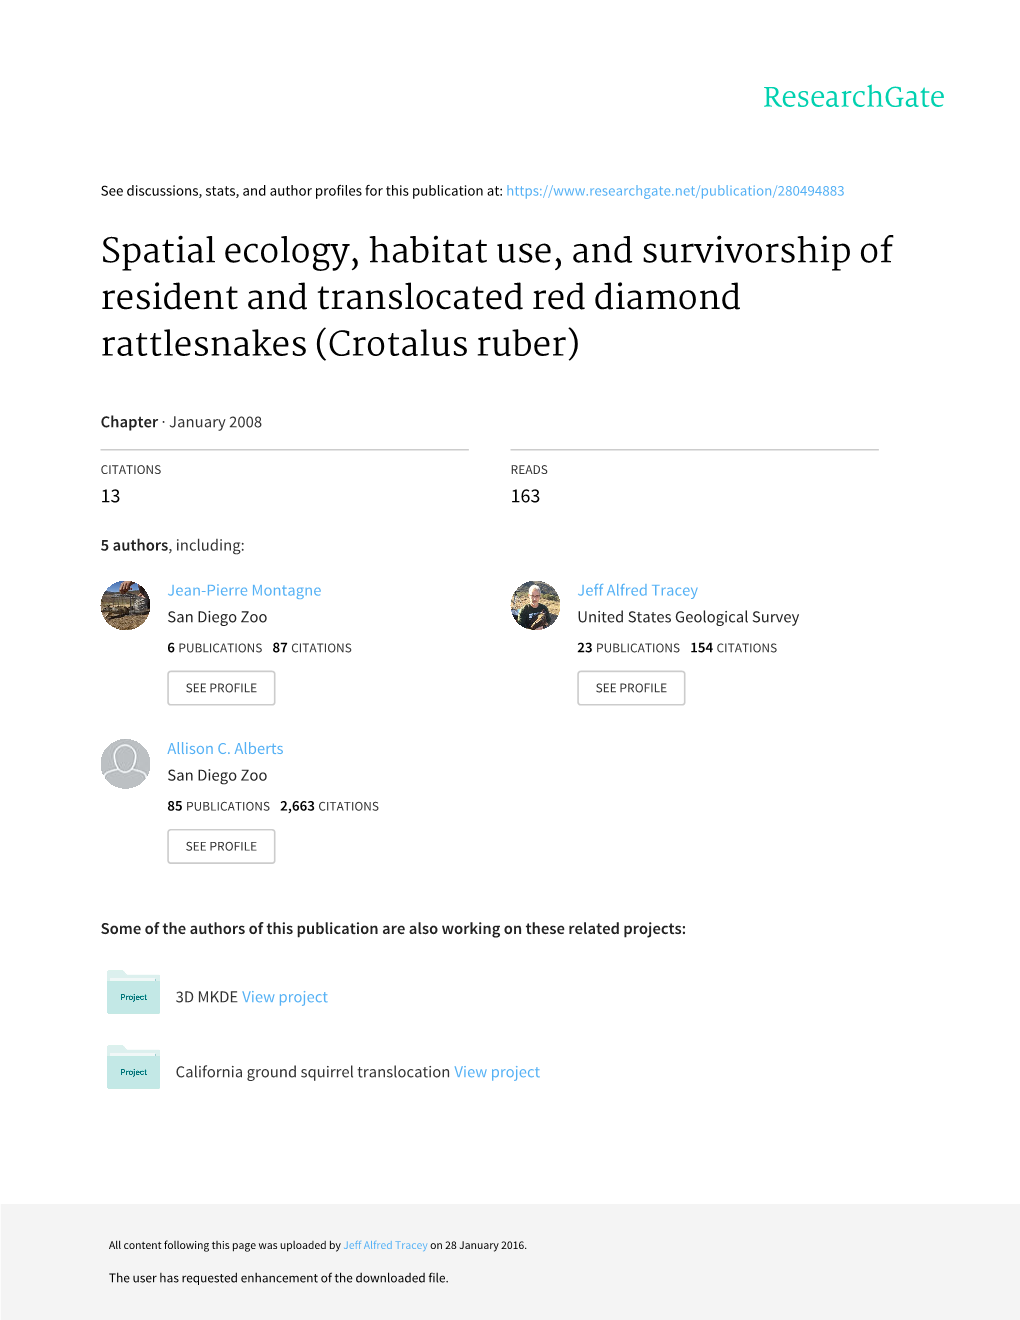 Spatial Ecology, Habitat Use, and Survivorship of Resident and Translocated Red Diamond Rattlesnakes (Crotalus Ruber)